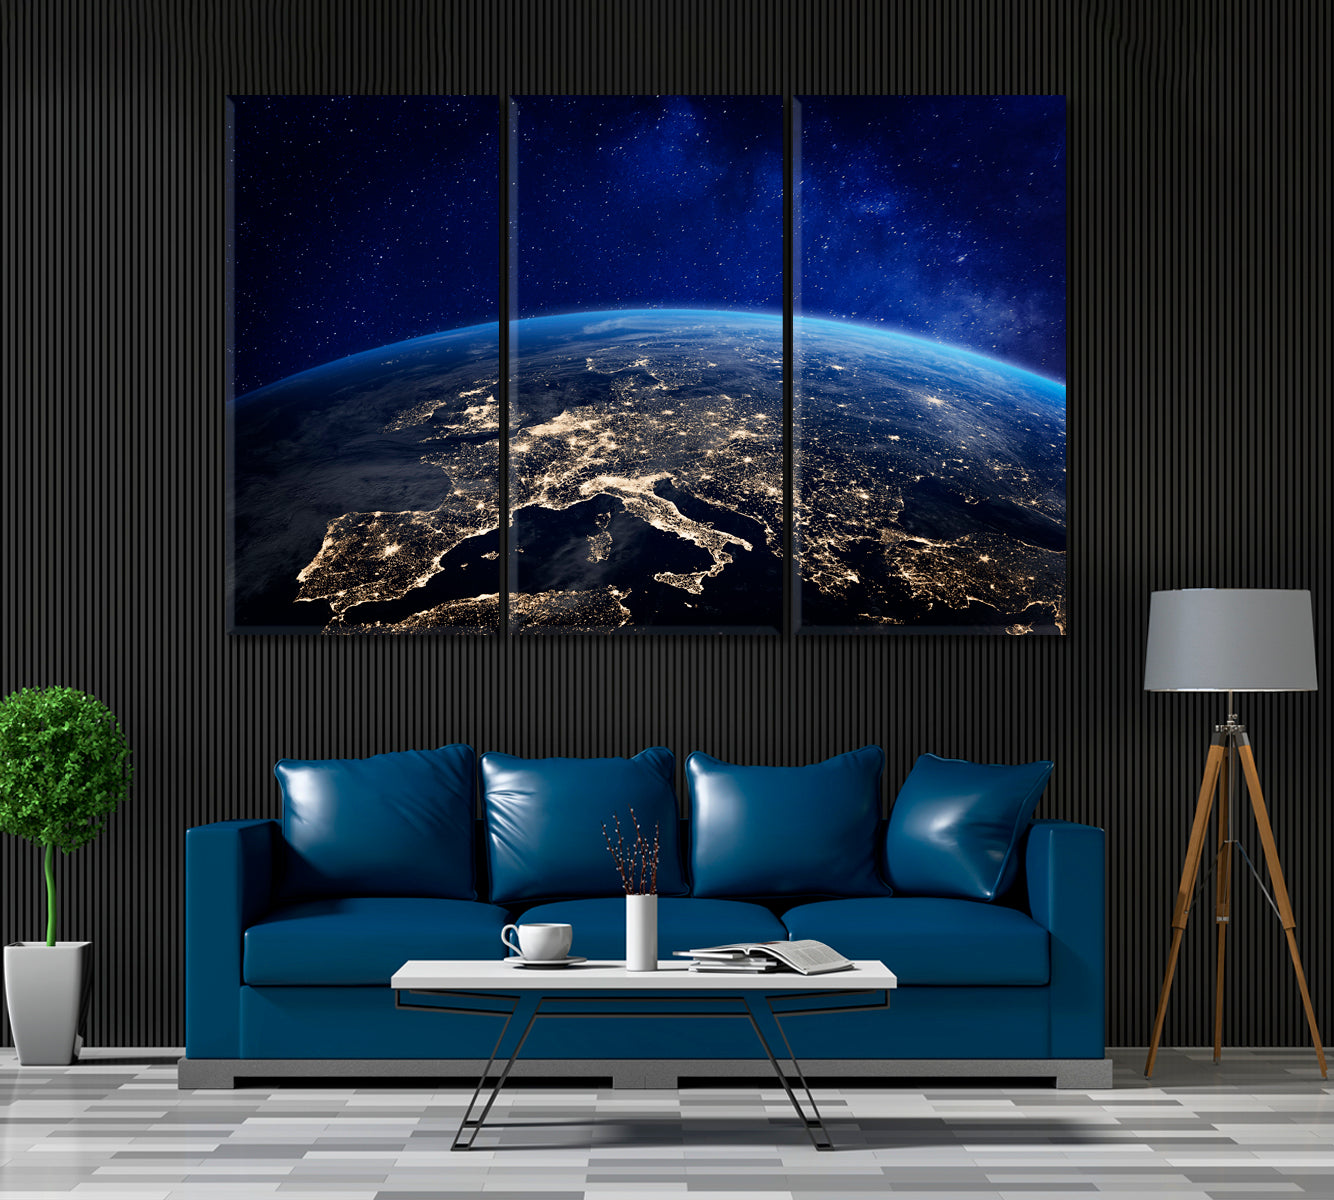 Planet Earth City Lights Canvas Print ArtLexy 5 Panels 36"x24" inches 